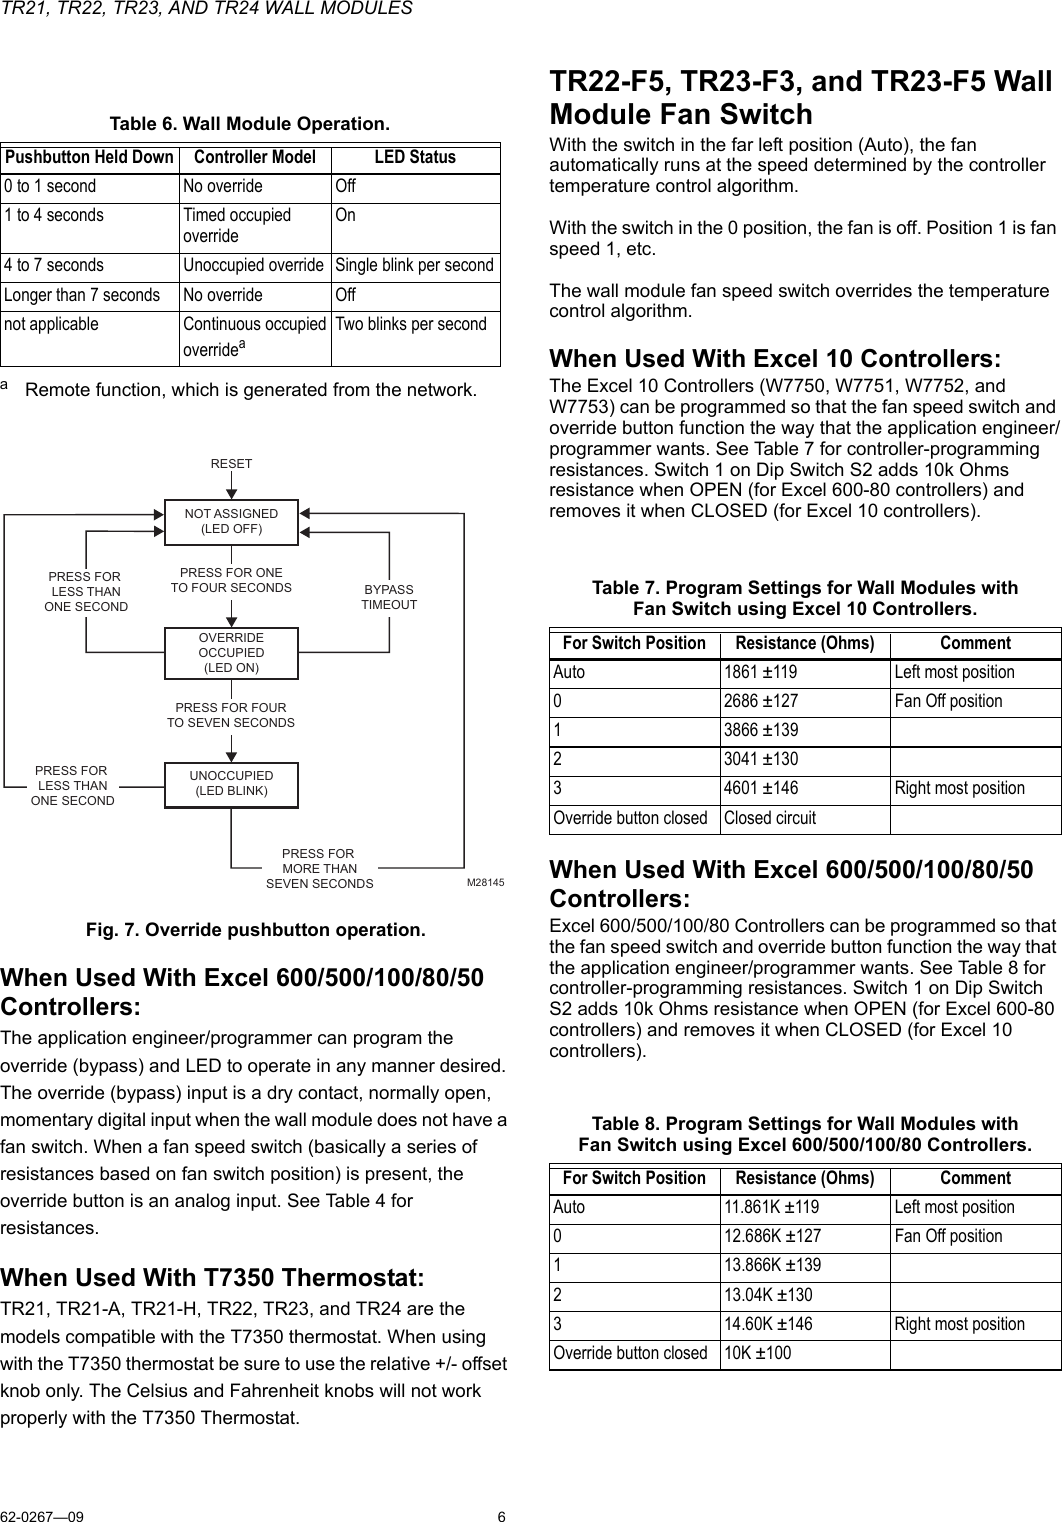 Page 6 of 8 - Honeywell Honeywell-Honeywell-Tv-Mount-Tr21-Users-Manual- 62-0267_E TR21, TR22, TR23, And TR24 Wall Modules  Honeywell-honeywell-tv-mount-tr21-users-manual